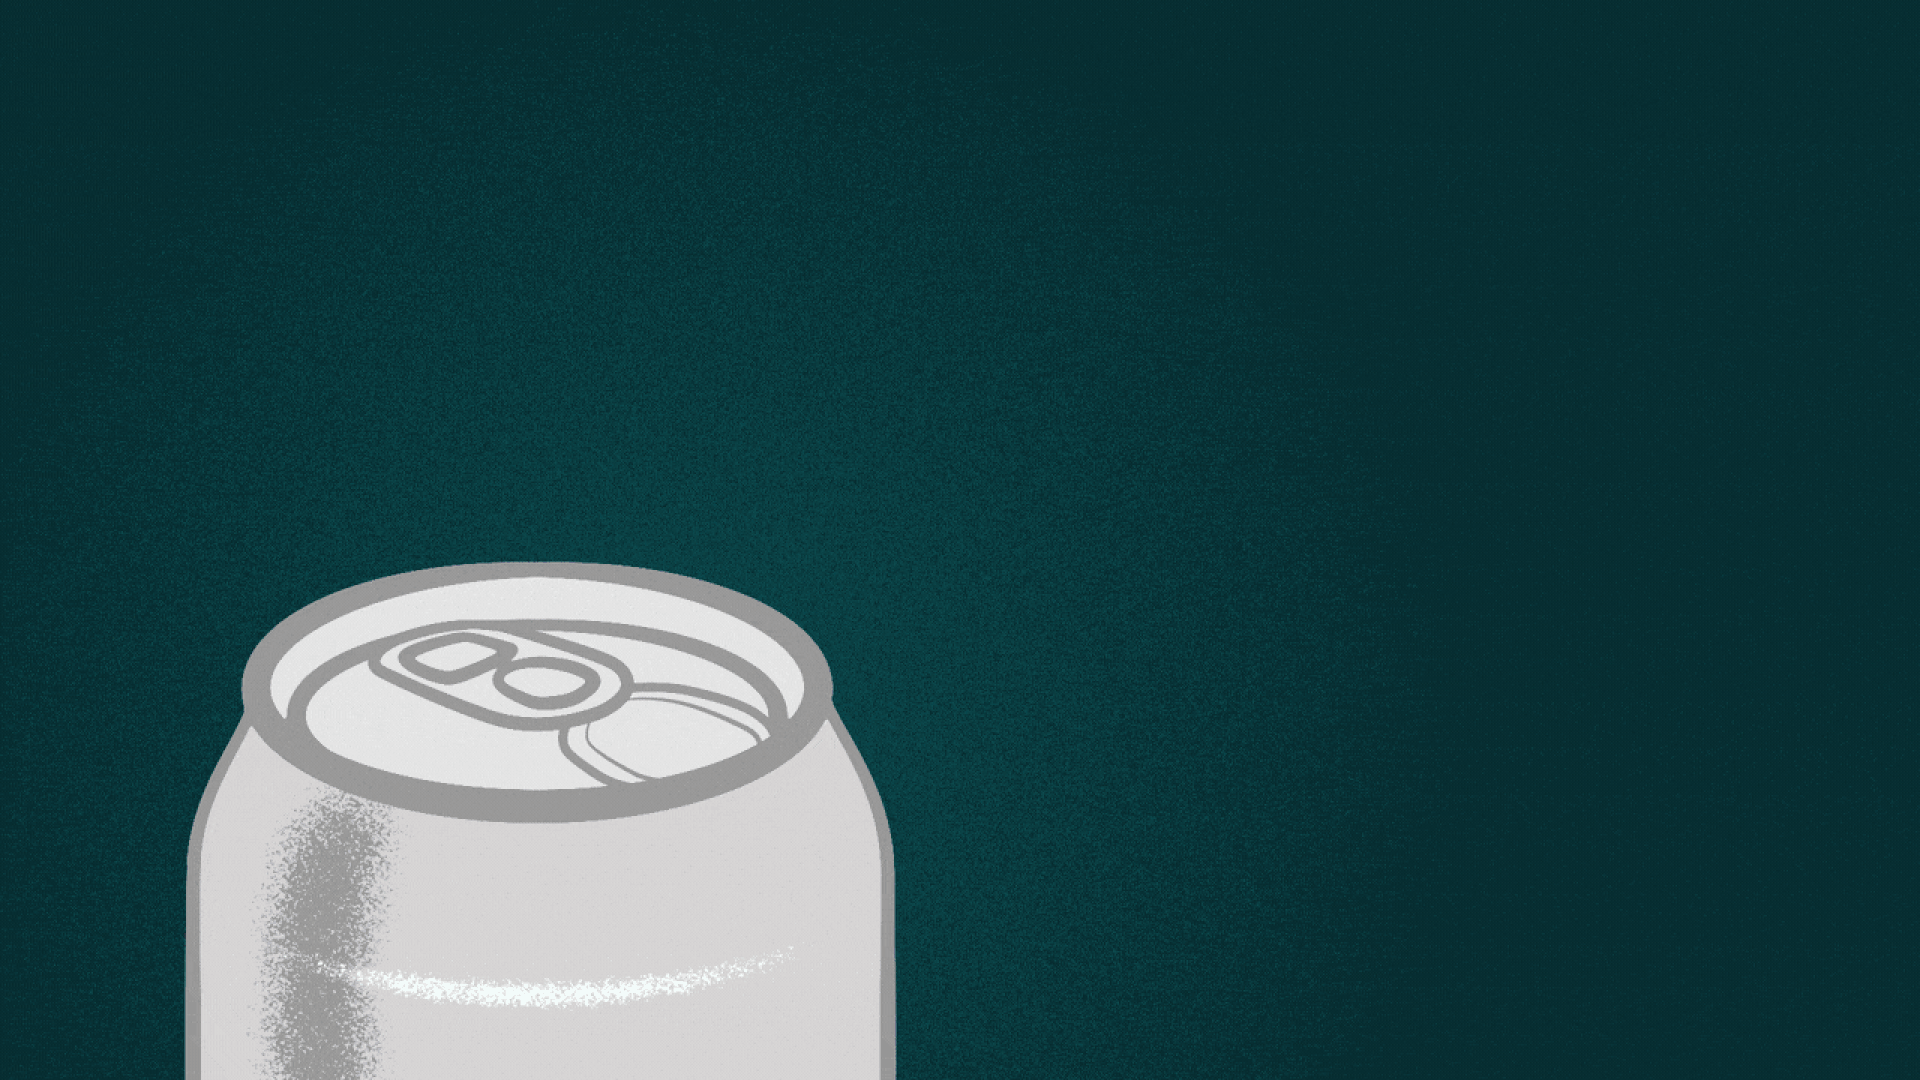 Animated illustration of a beer can opening and confetti bursting out.